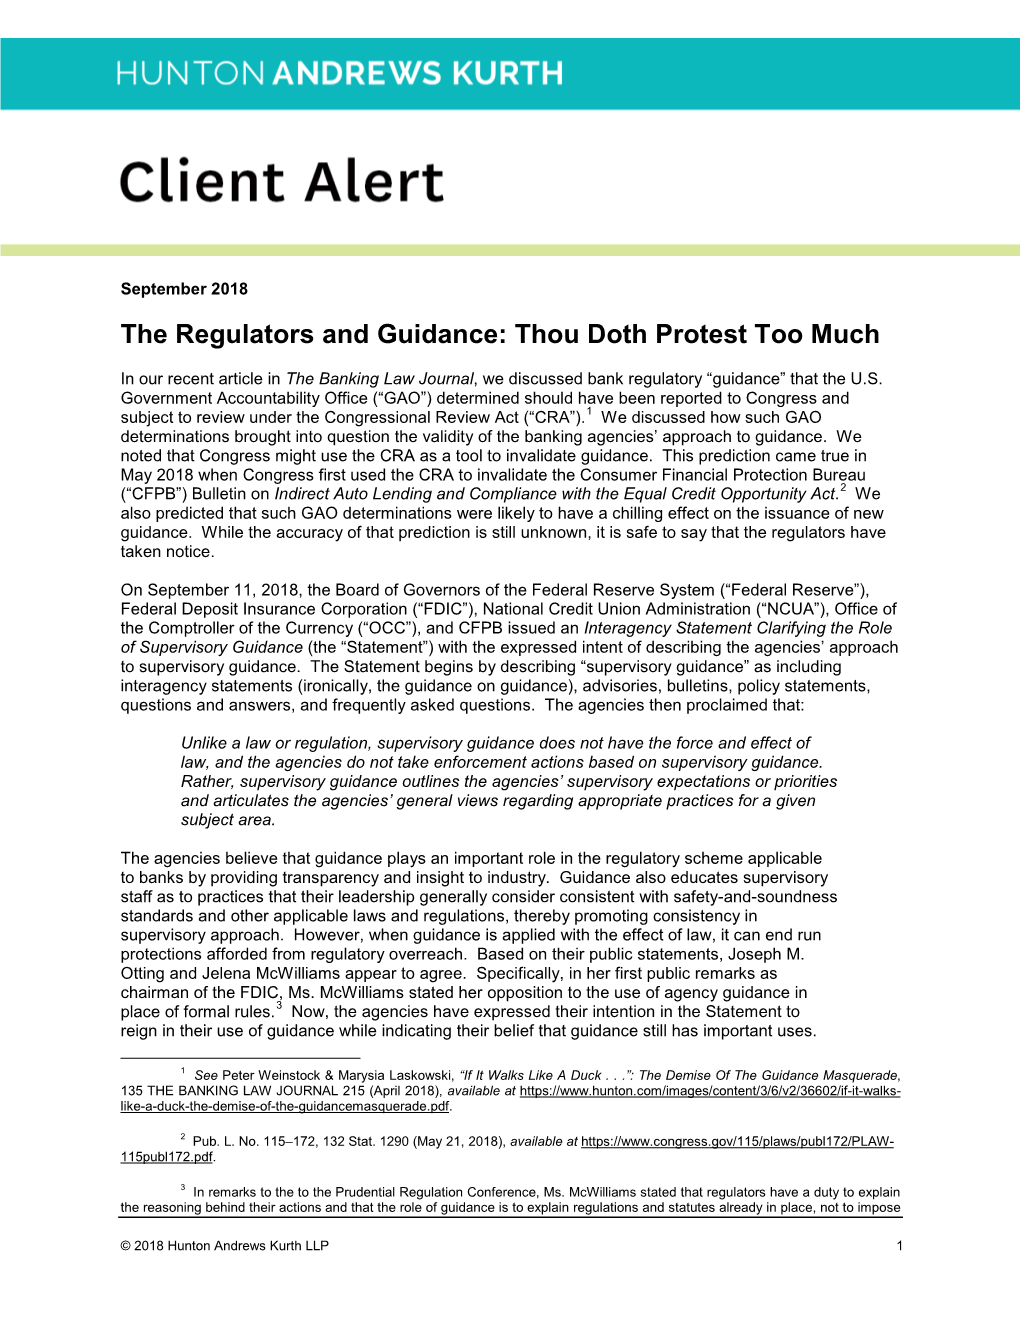 The Regulators and Guidance: Thou Doth Protest Too Much